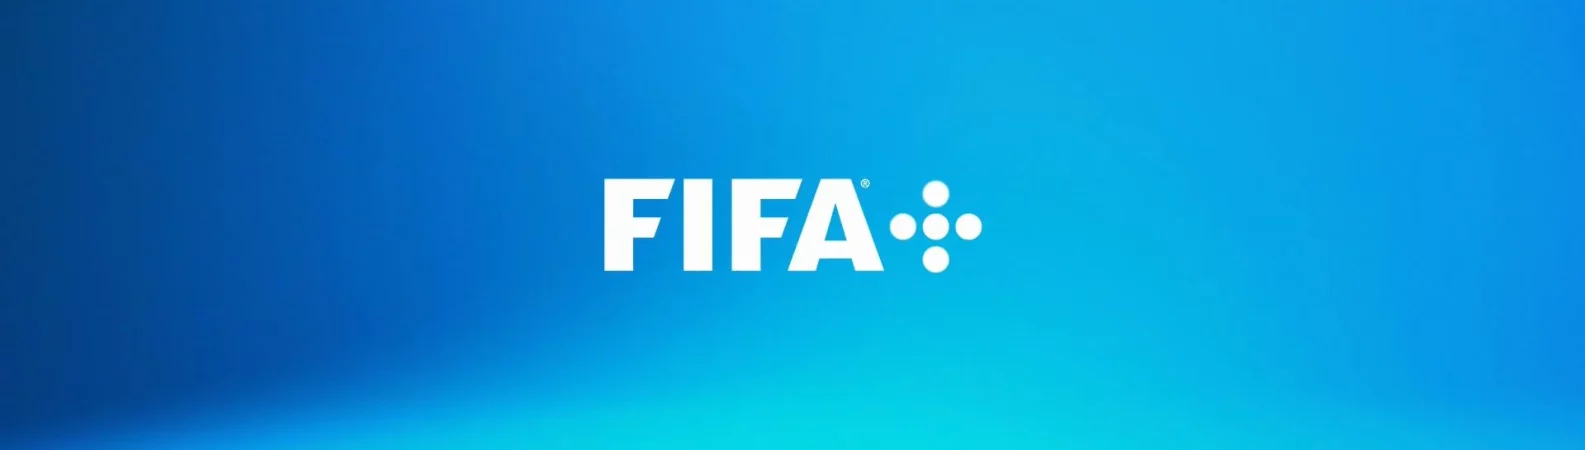 Grenada's Premier League to be streamed on FIFA Plus